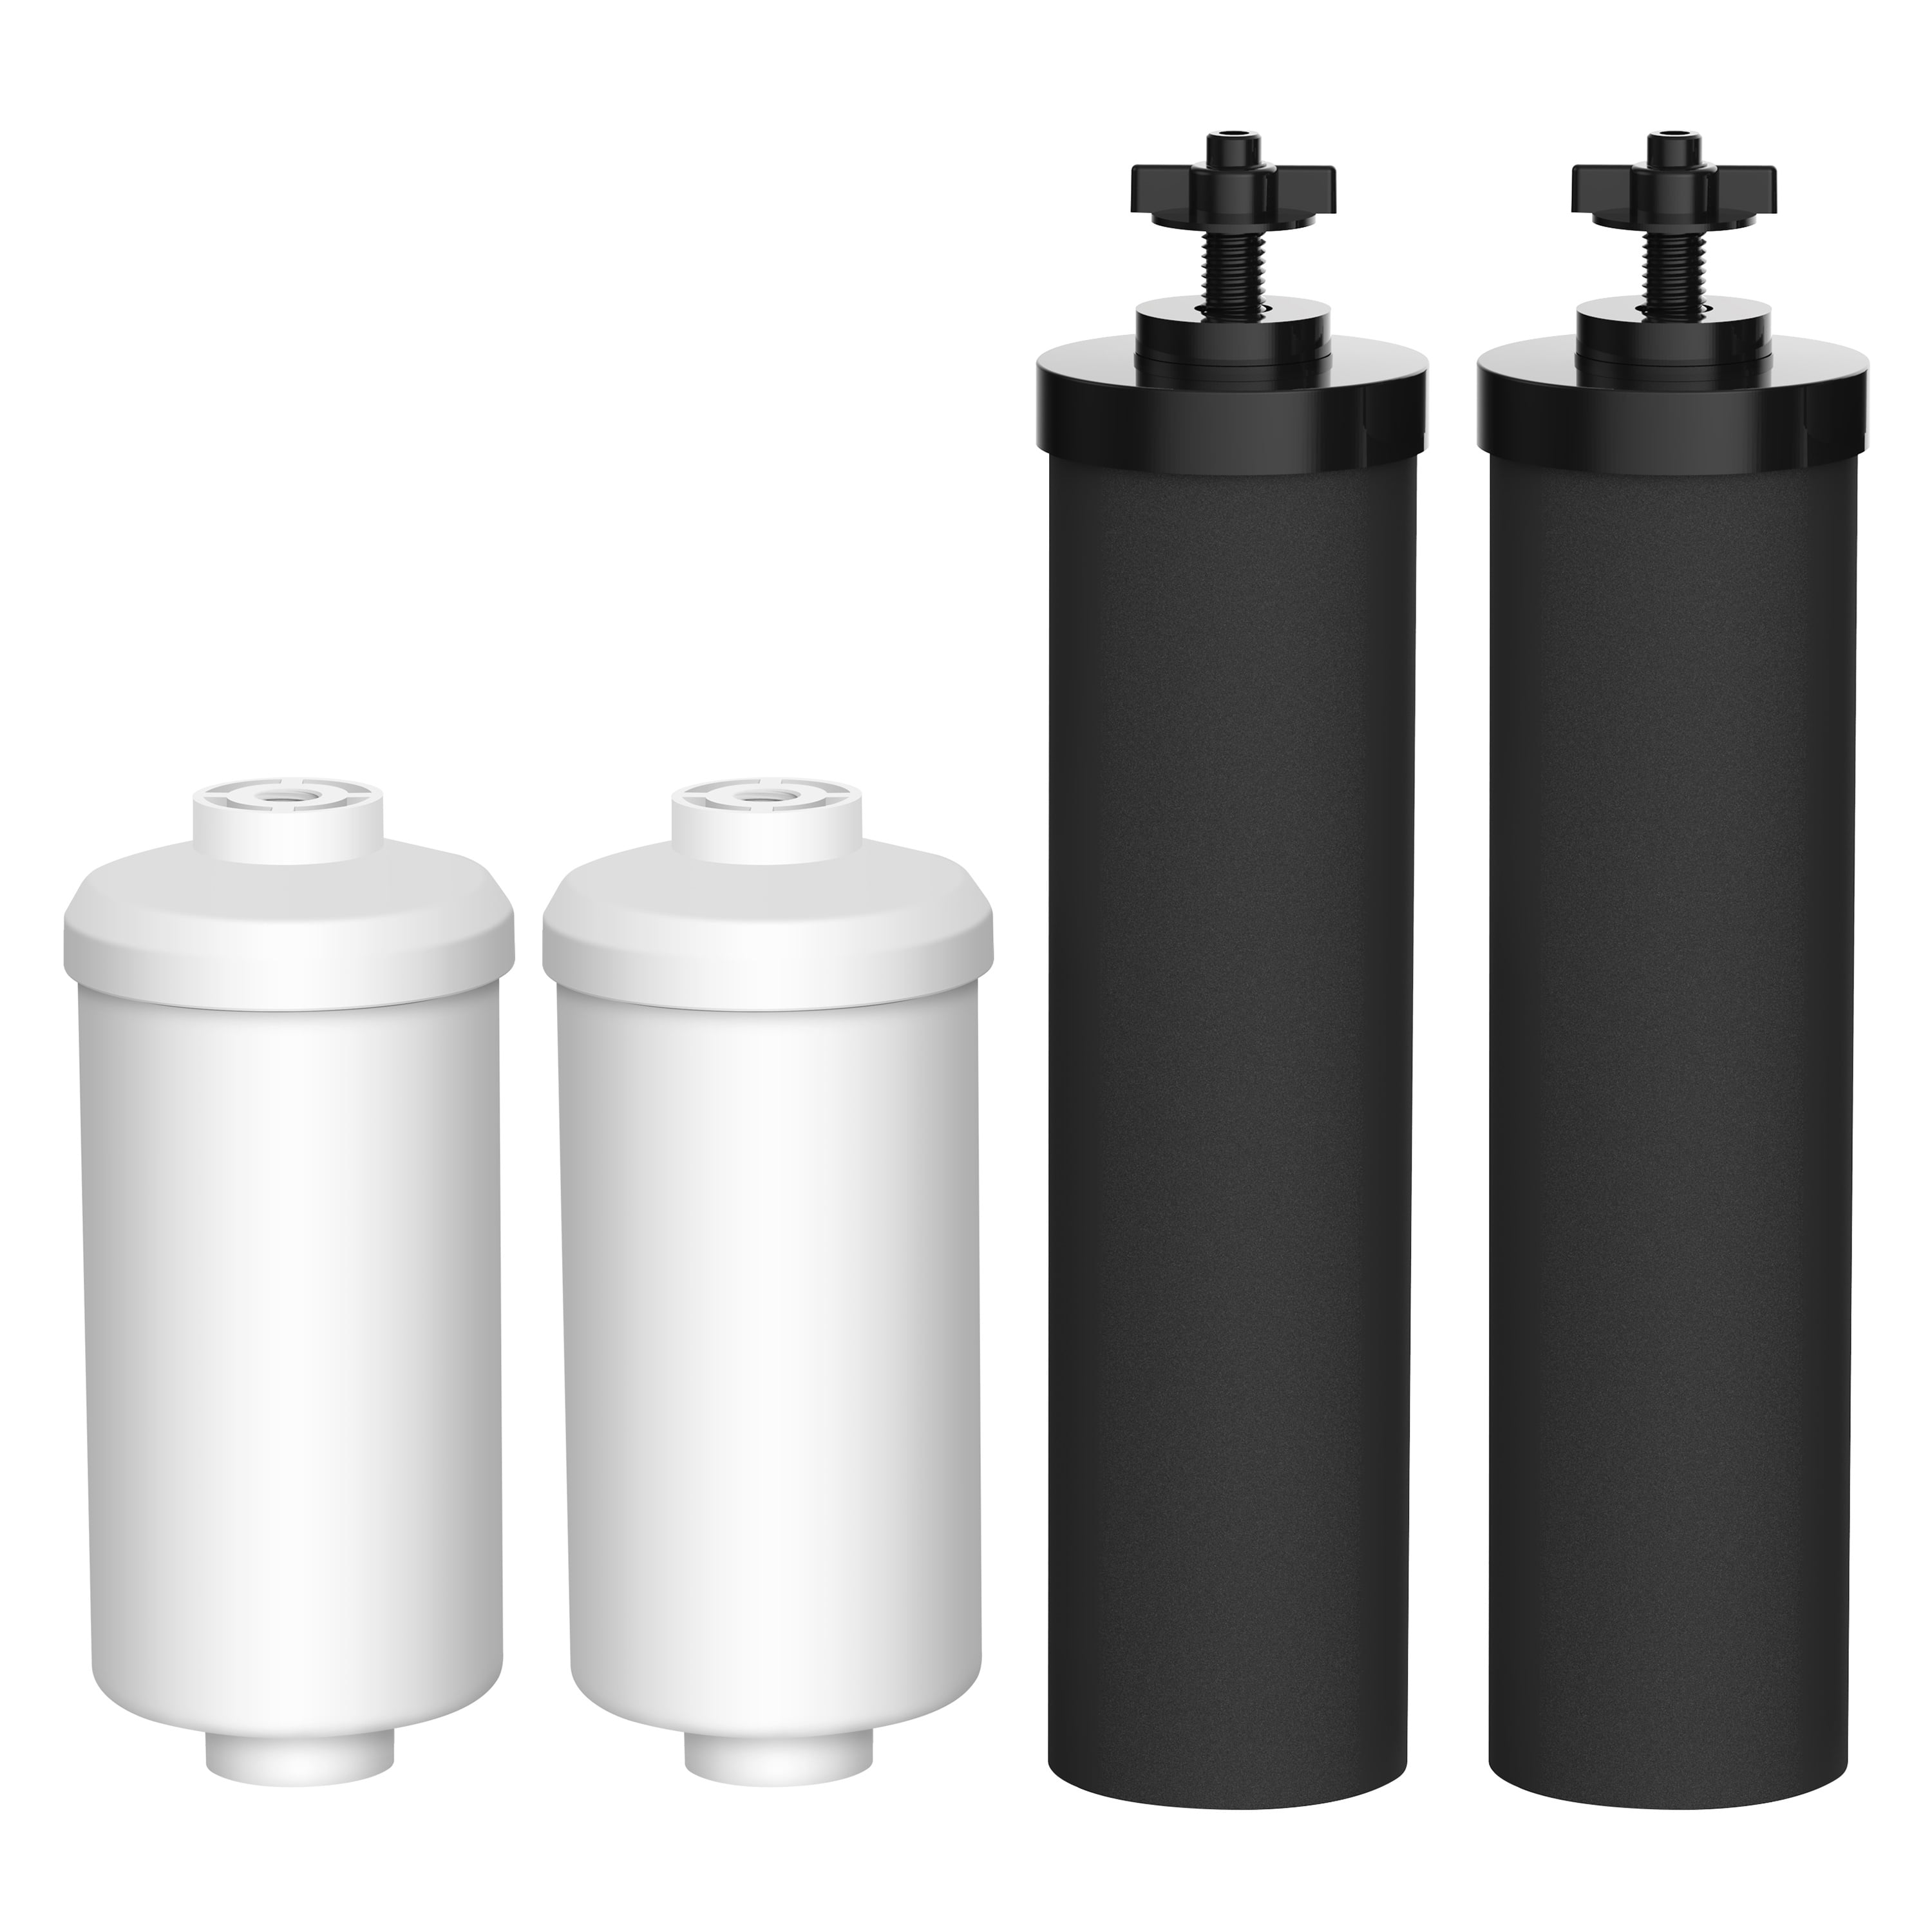 Black Berkey Replacement Filters  Fluoride Filters Combo Pack Includes 2 Blac